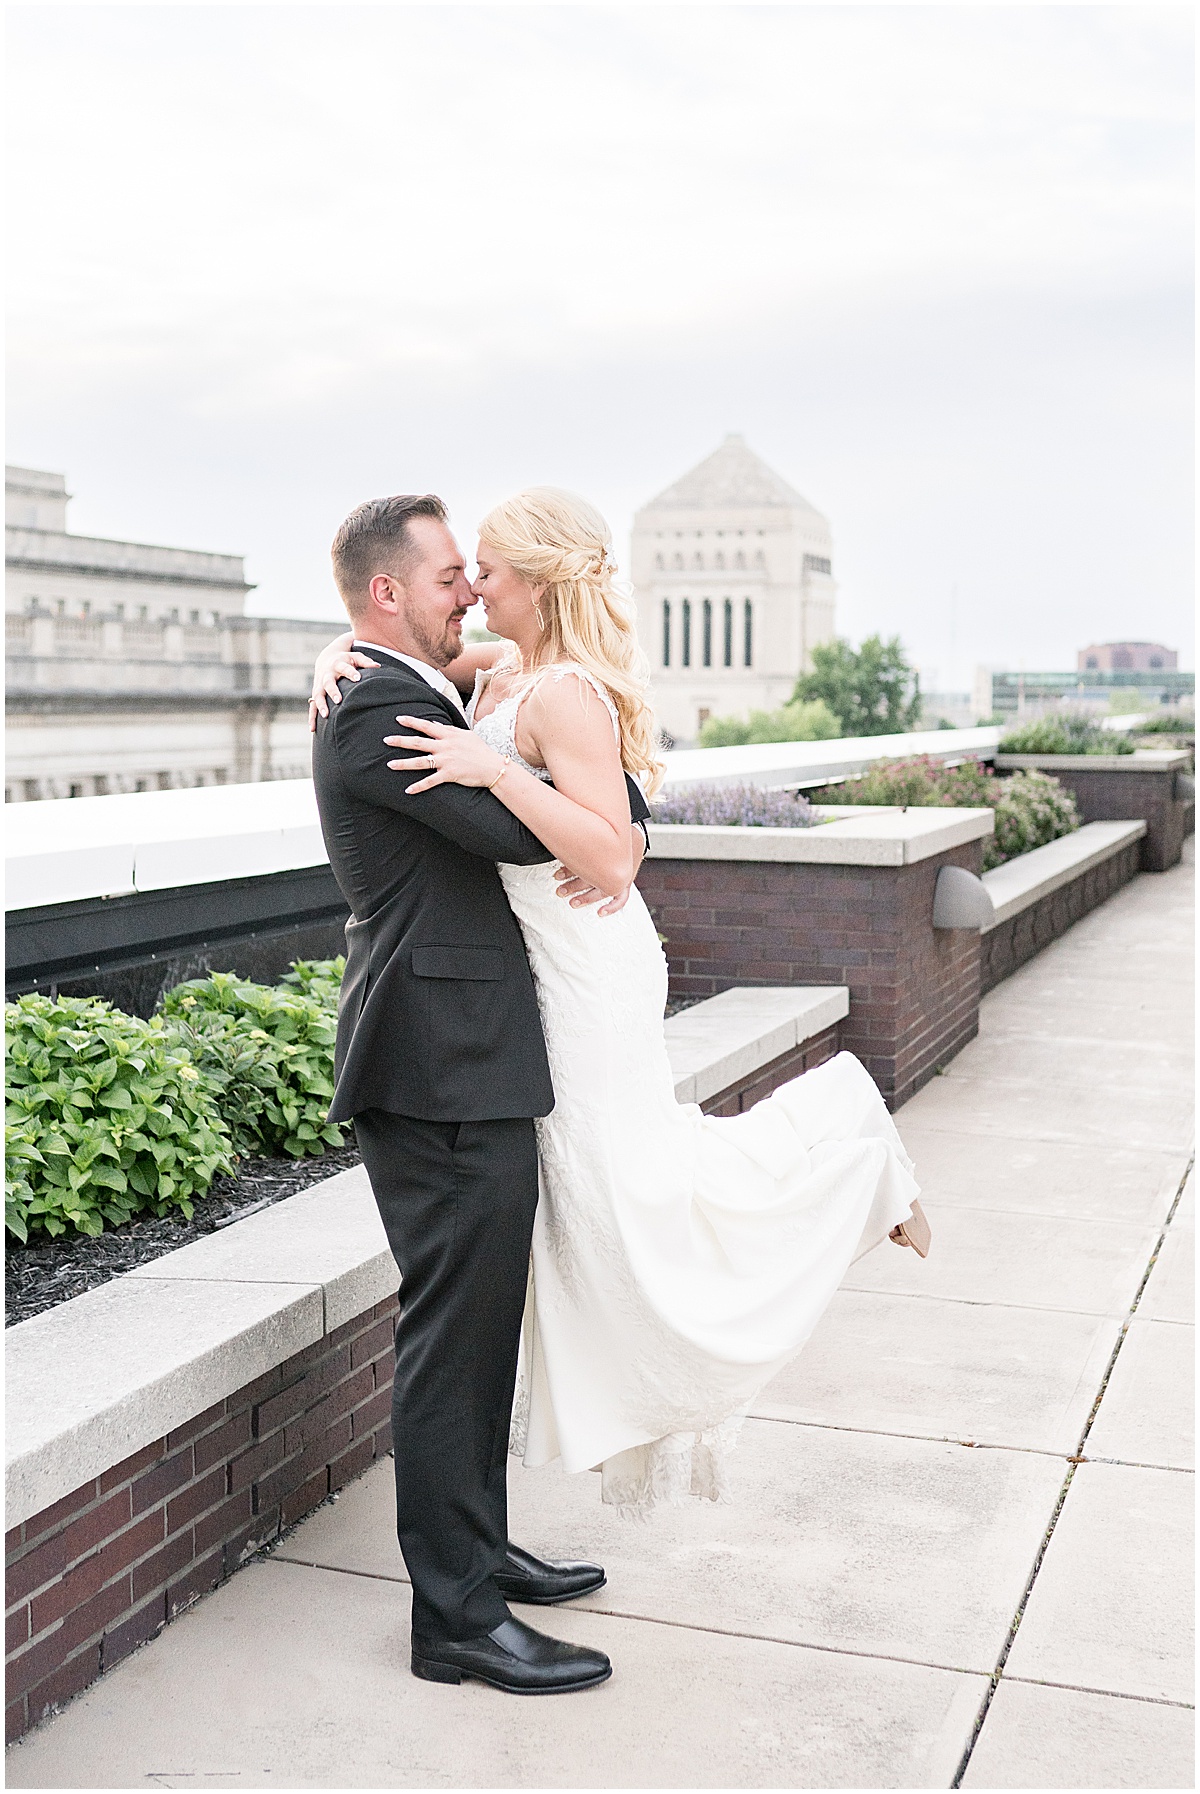 David & Rachel: Christmas Engagement Photos in Downtown Indianapolis